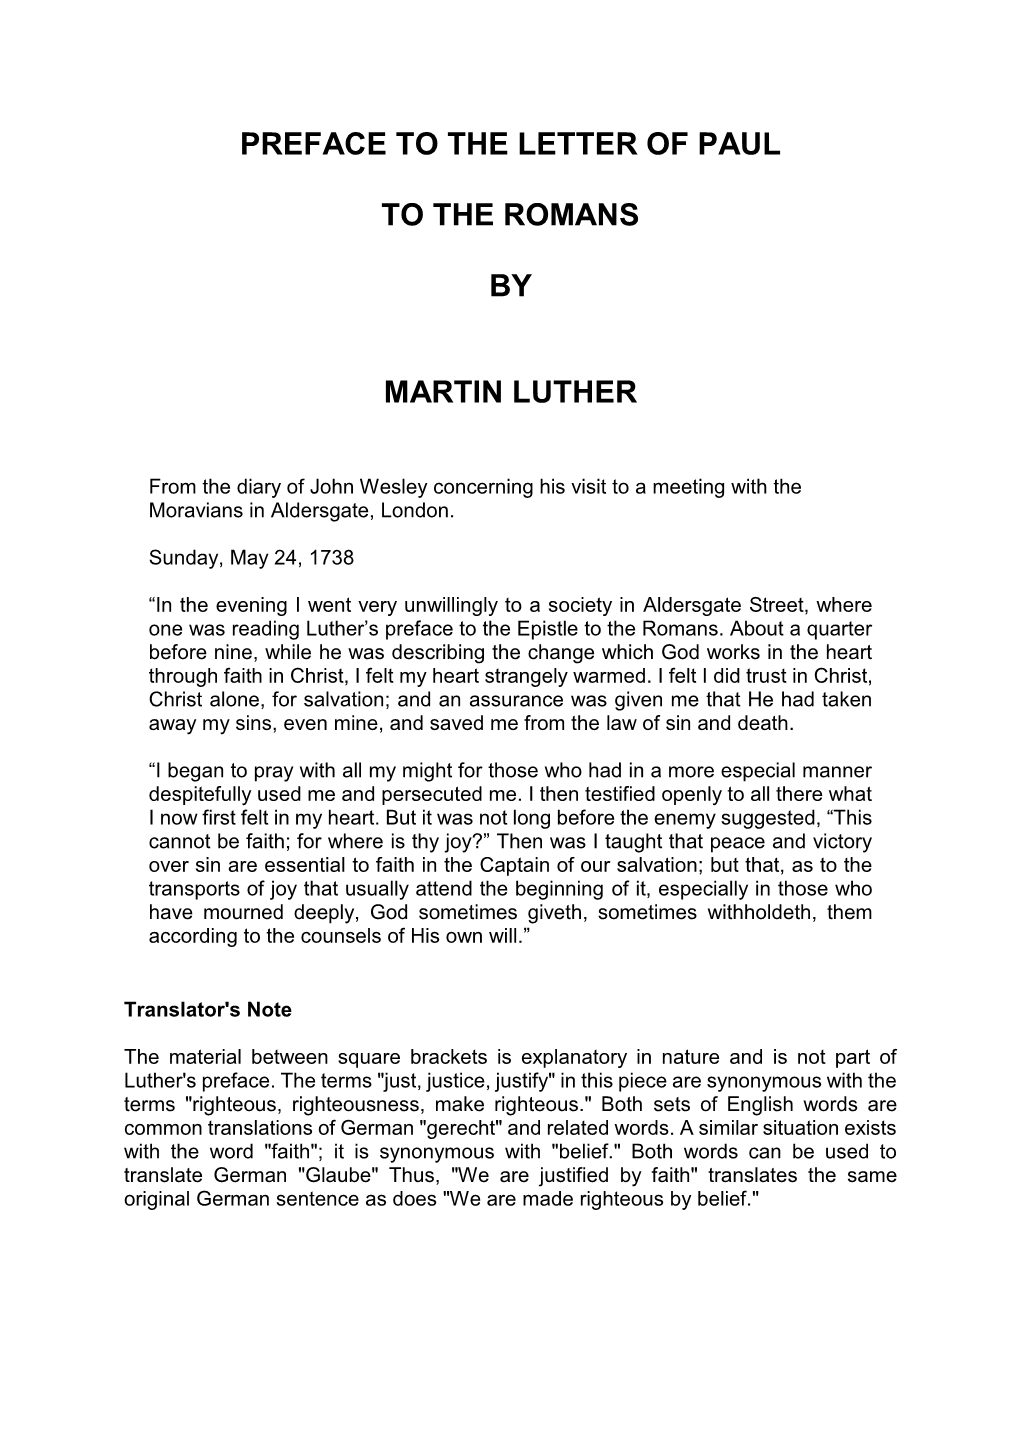 Preface to the Letter of Paul to the Romans by Martin